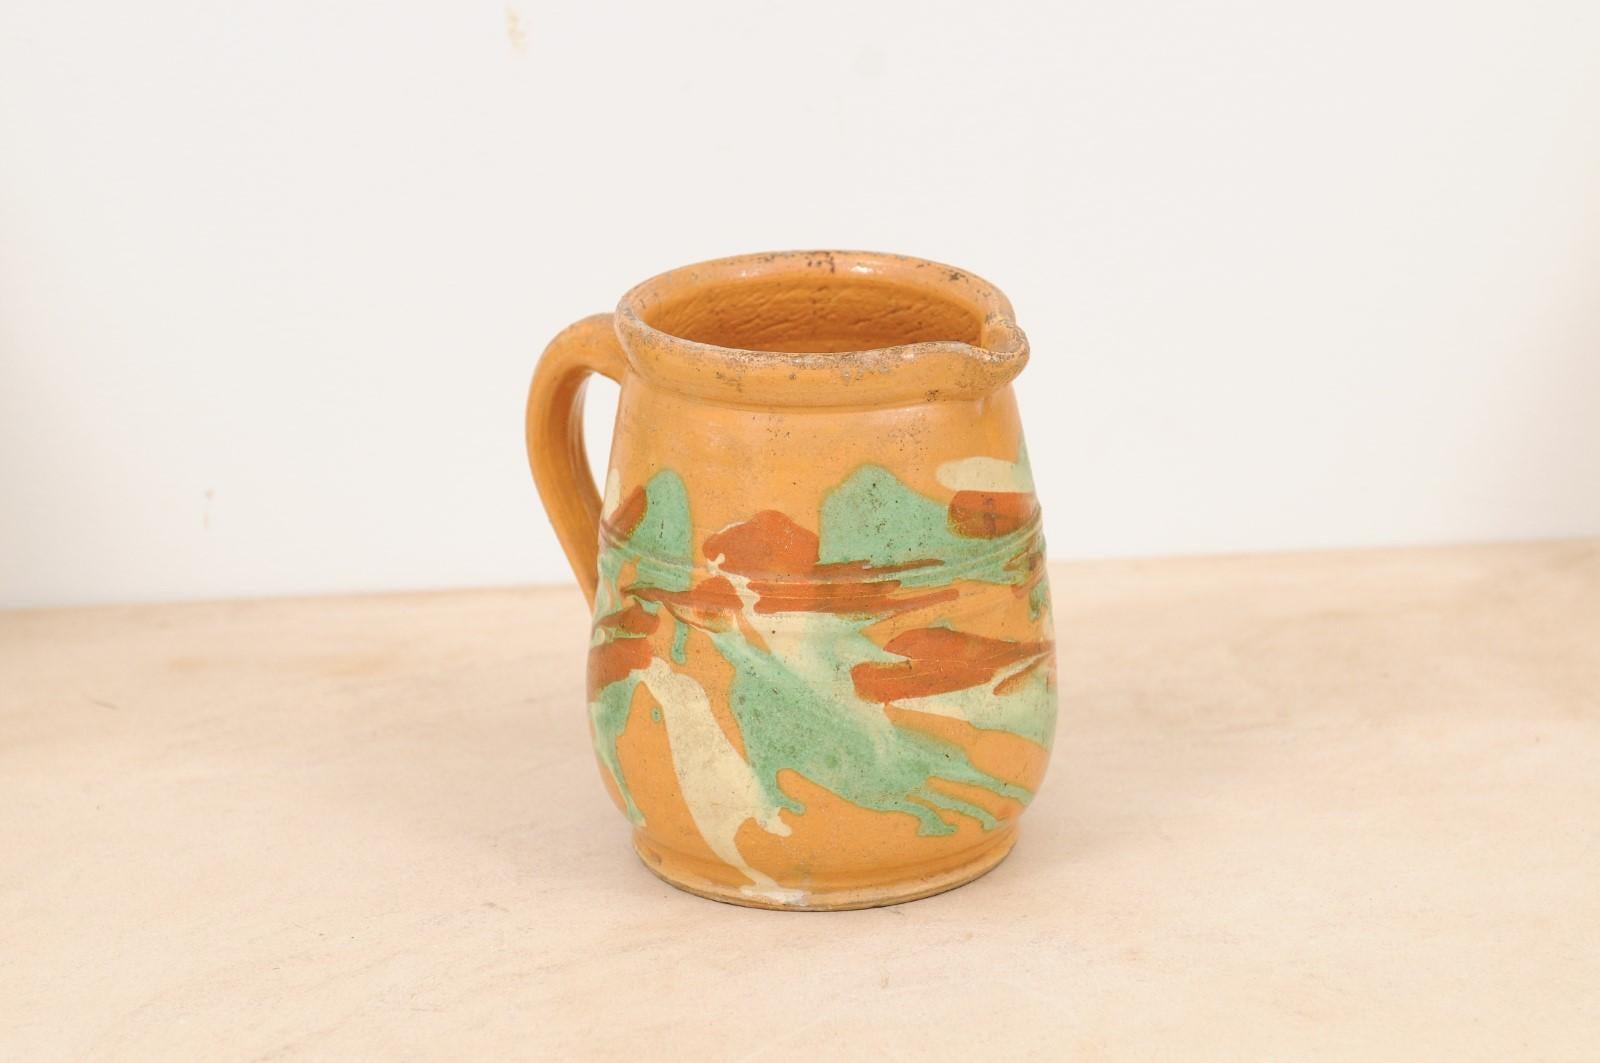 A French jaspe pottery pitcher from the 19th century, with yellow glaze and green accents. Created in France during the 19th century, this jaspe pottery pitcher features a yellow glaze accented with green, cream and brown motifs. Showcasing a back